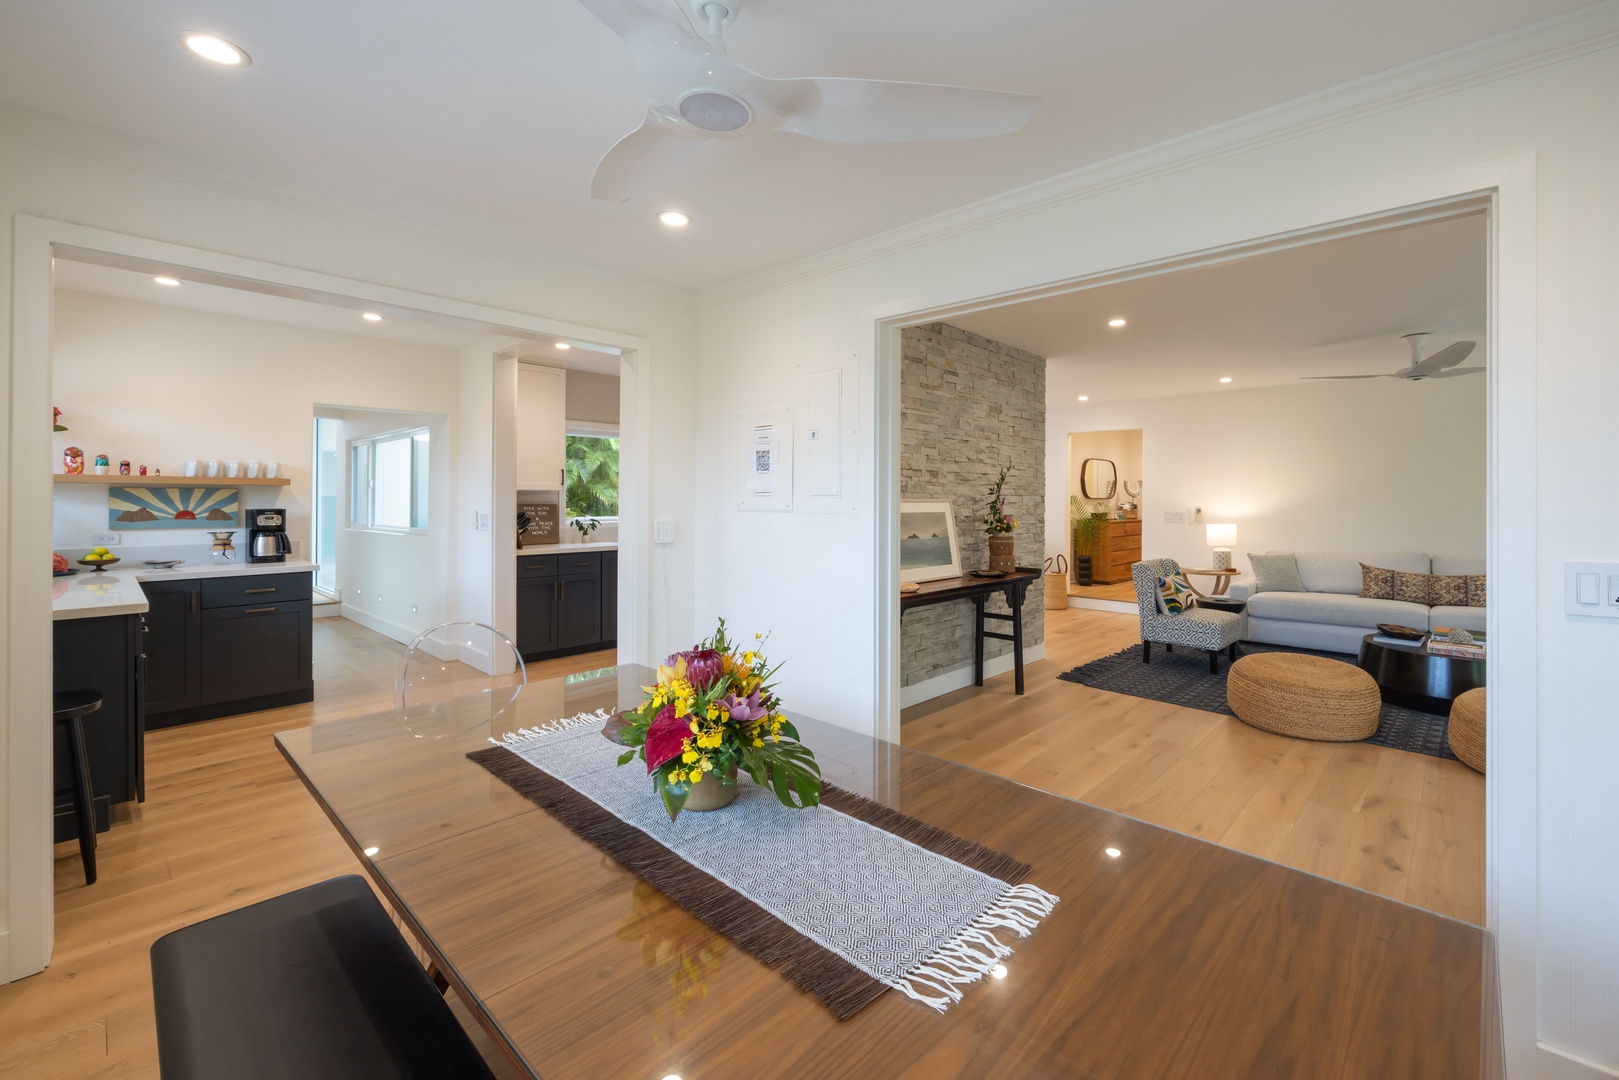 Kailua Vacation Rentals, Lanikai Ola Nani - Dine in style and soak in the scenery from our perfectly positioned dining table.